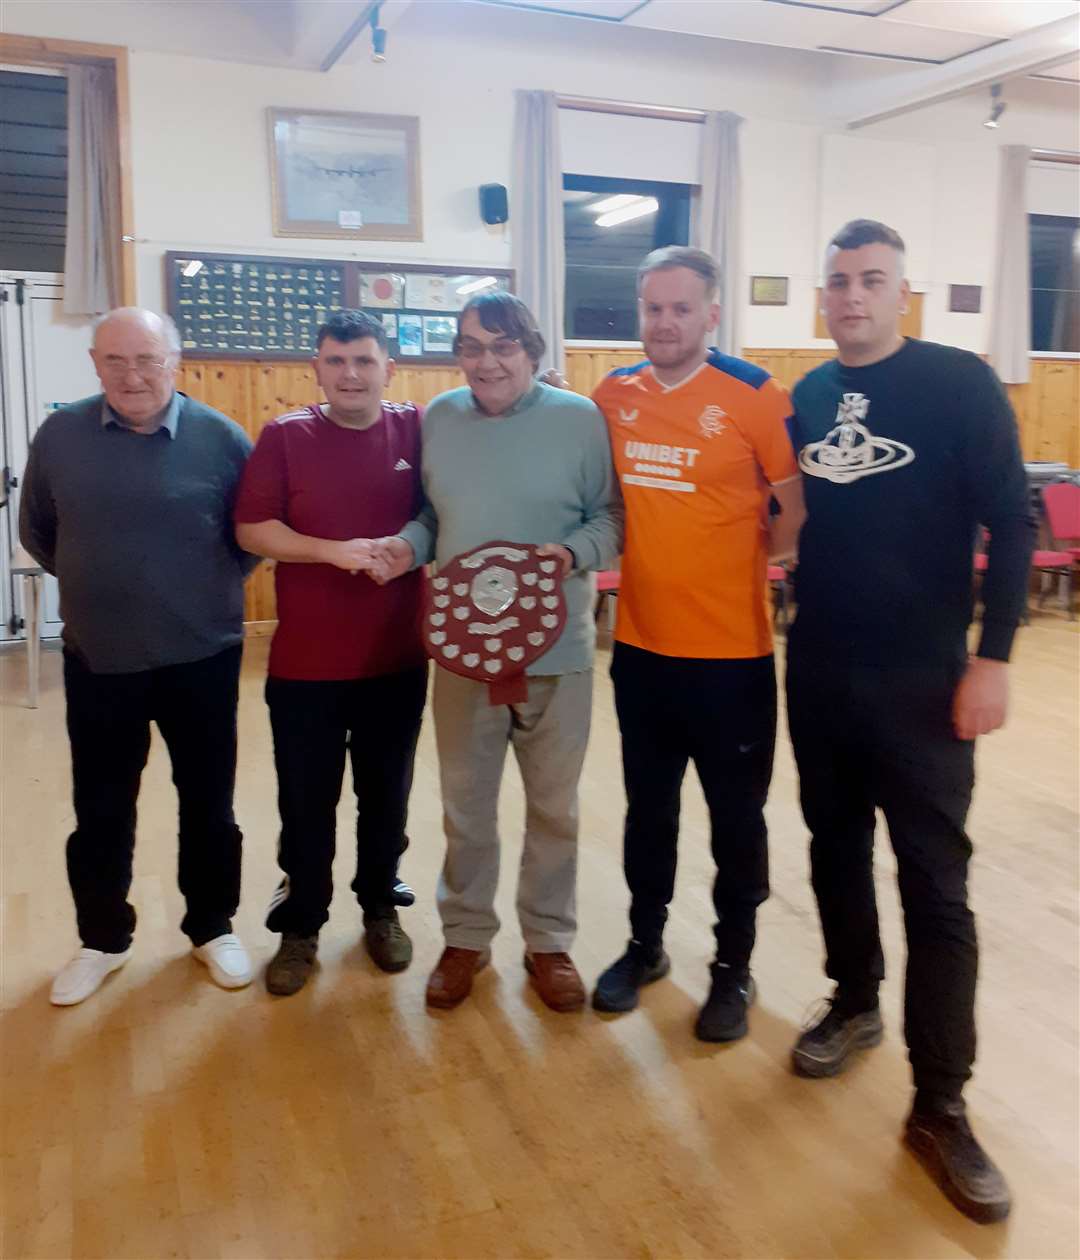 Sponsor Ian Maclean (centre) presents the Forss Open Triples Shield to the winning Scrabster team of Scott Christie, Ross Cowan and Ian Mackay, with chairman John Macdonald (left) looking on.